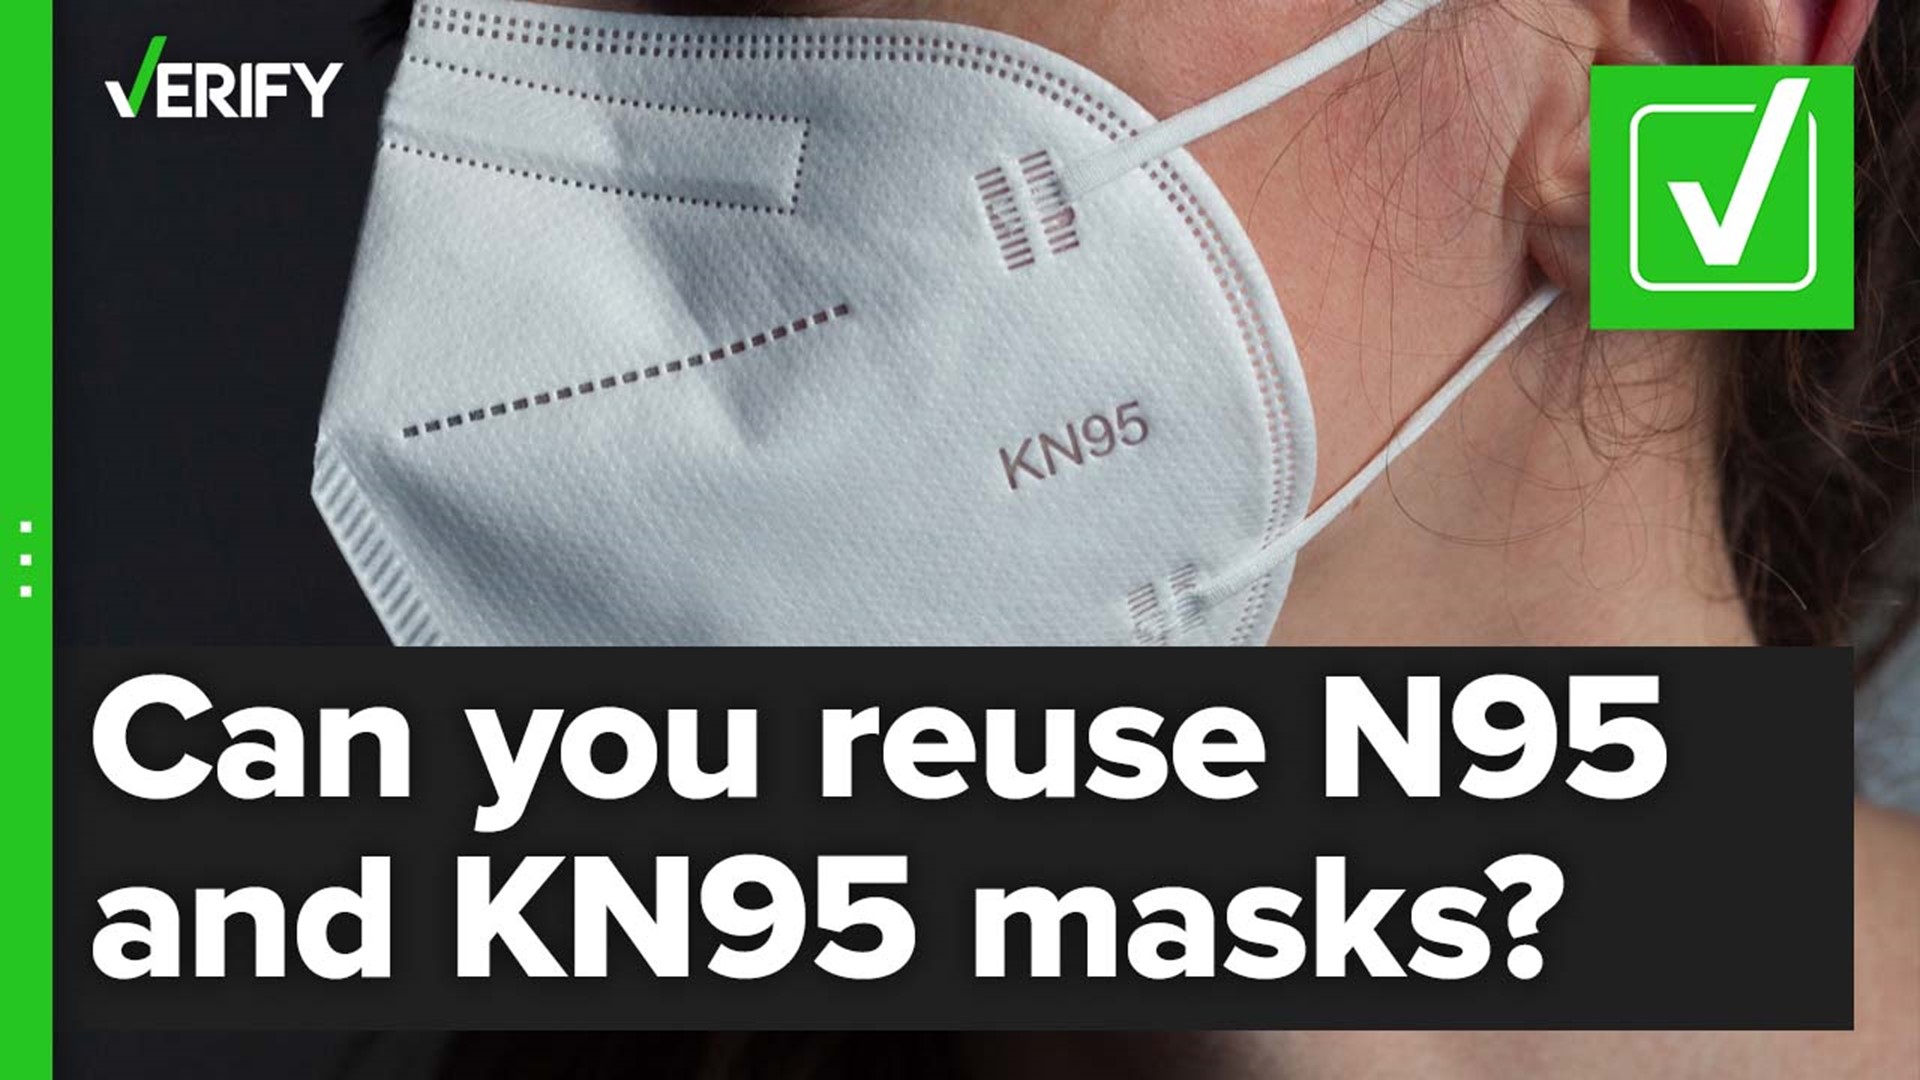 The CDC says KN95 and N95 masks offer more protection against COVID-19 than cloth masks. Here’s how to reuse them.